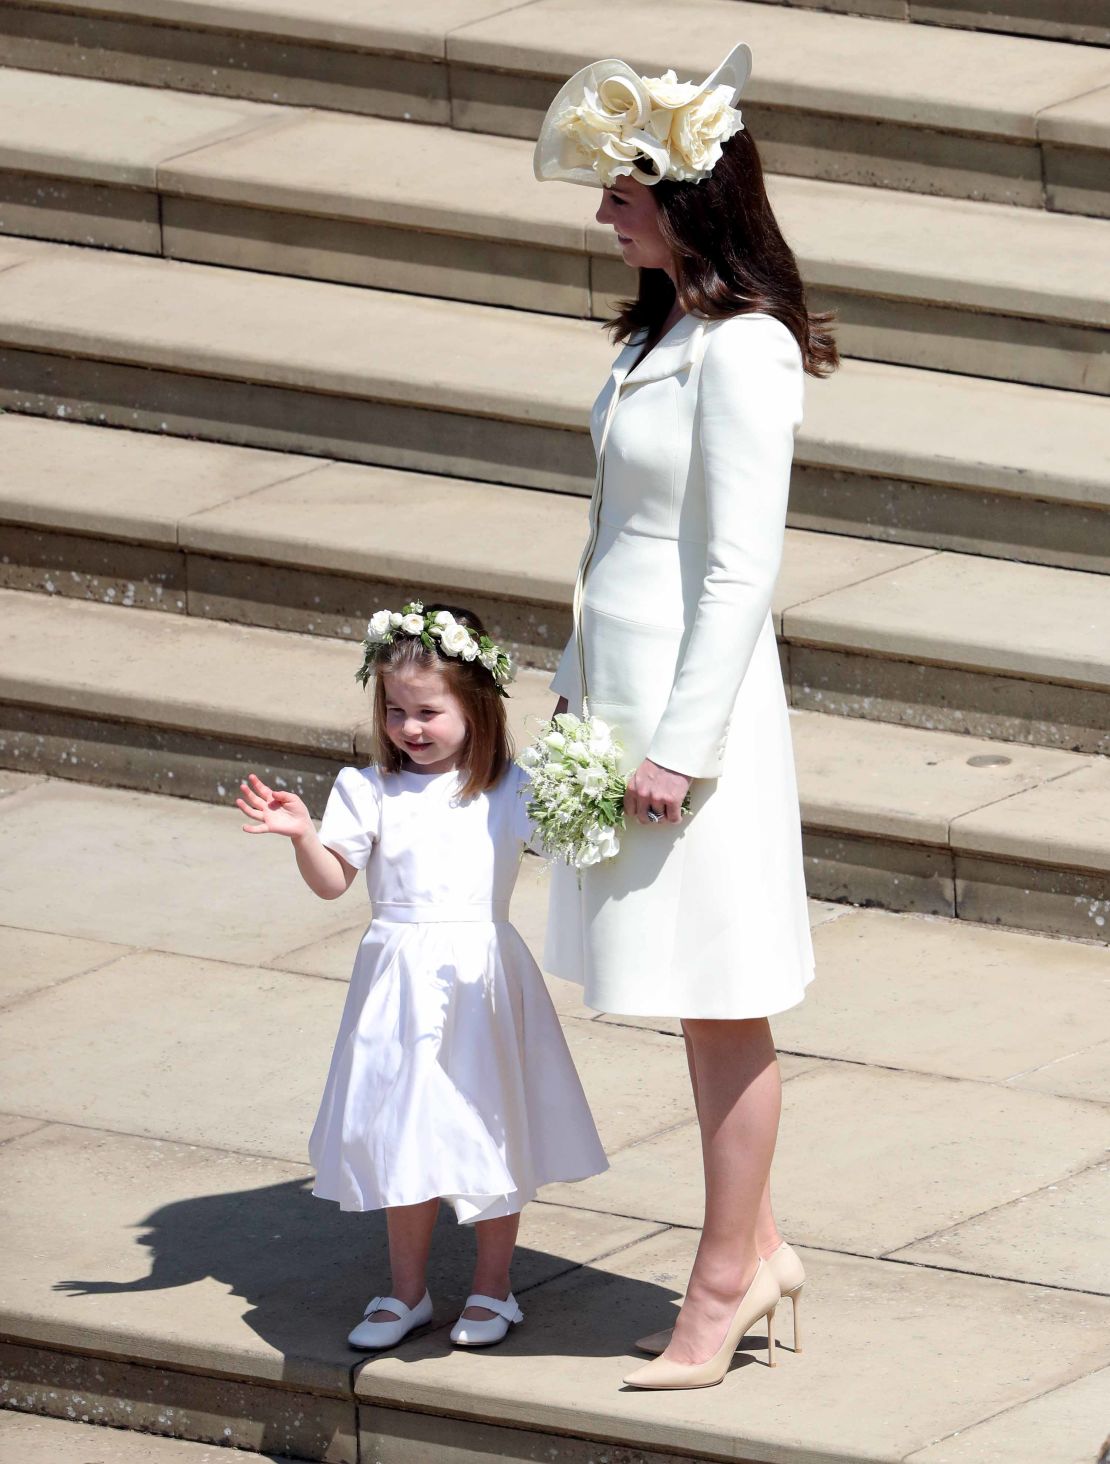 Princess Charlotte waves after the wedding.